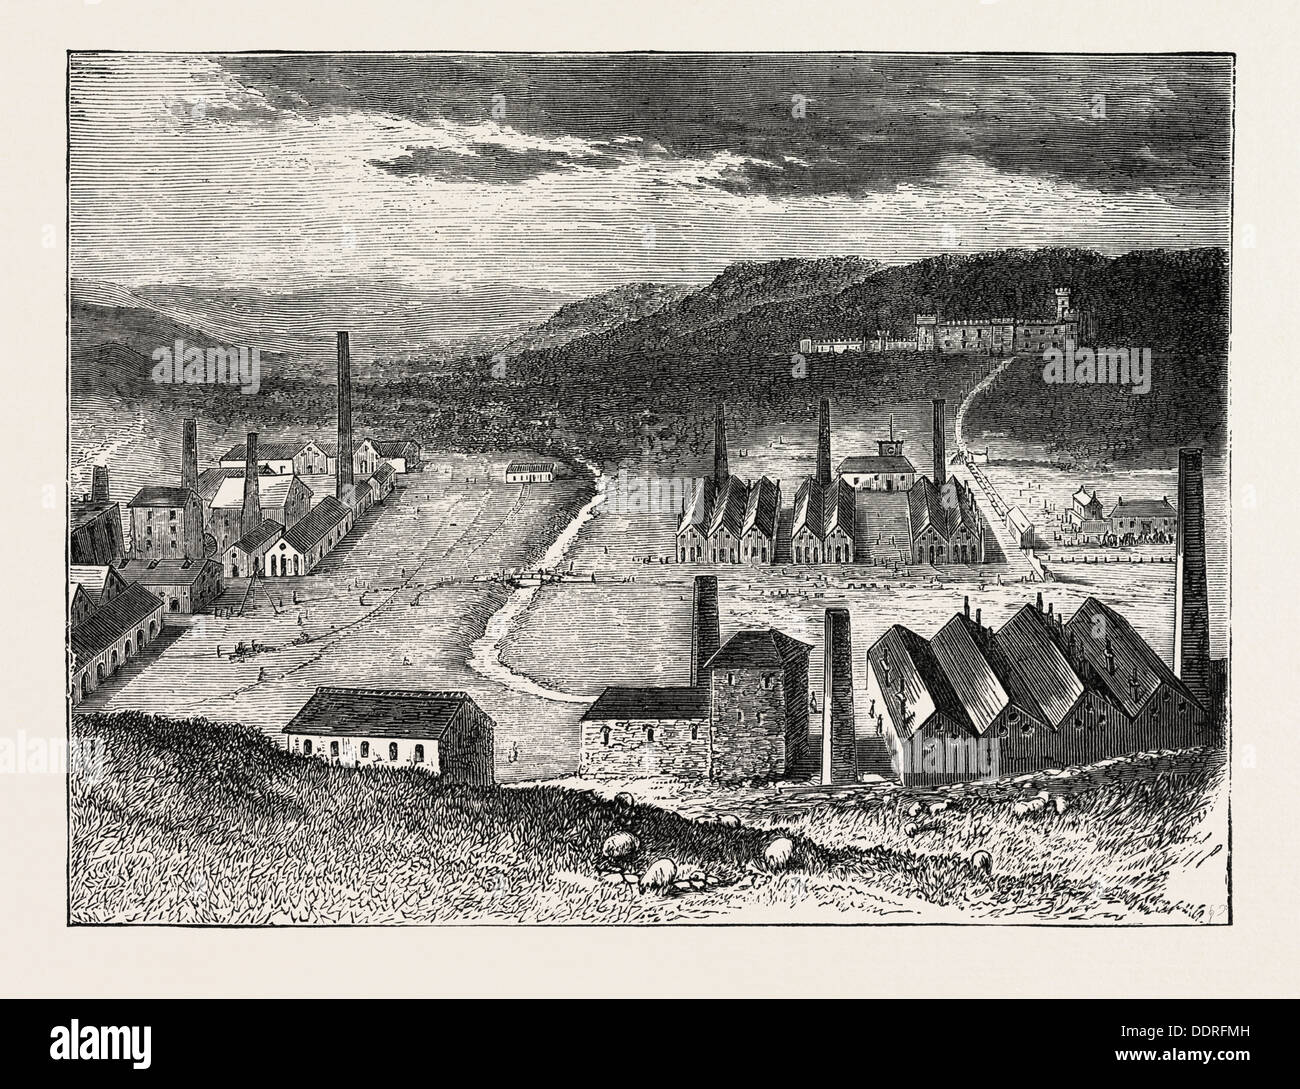 THE STRIKE IN SOUTH WALES, UK: THE CYFARTHFA IRONWORKS AND CASTLE, THE RESIDENCE OF MR. CRAWSHAY, 1873 engraving Stock Photo